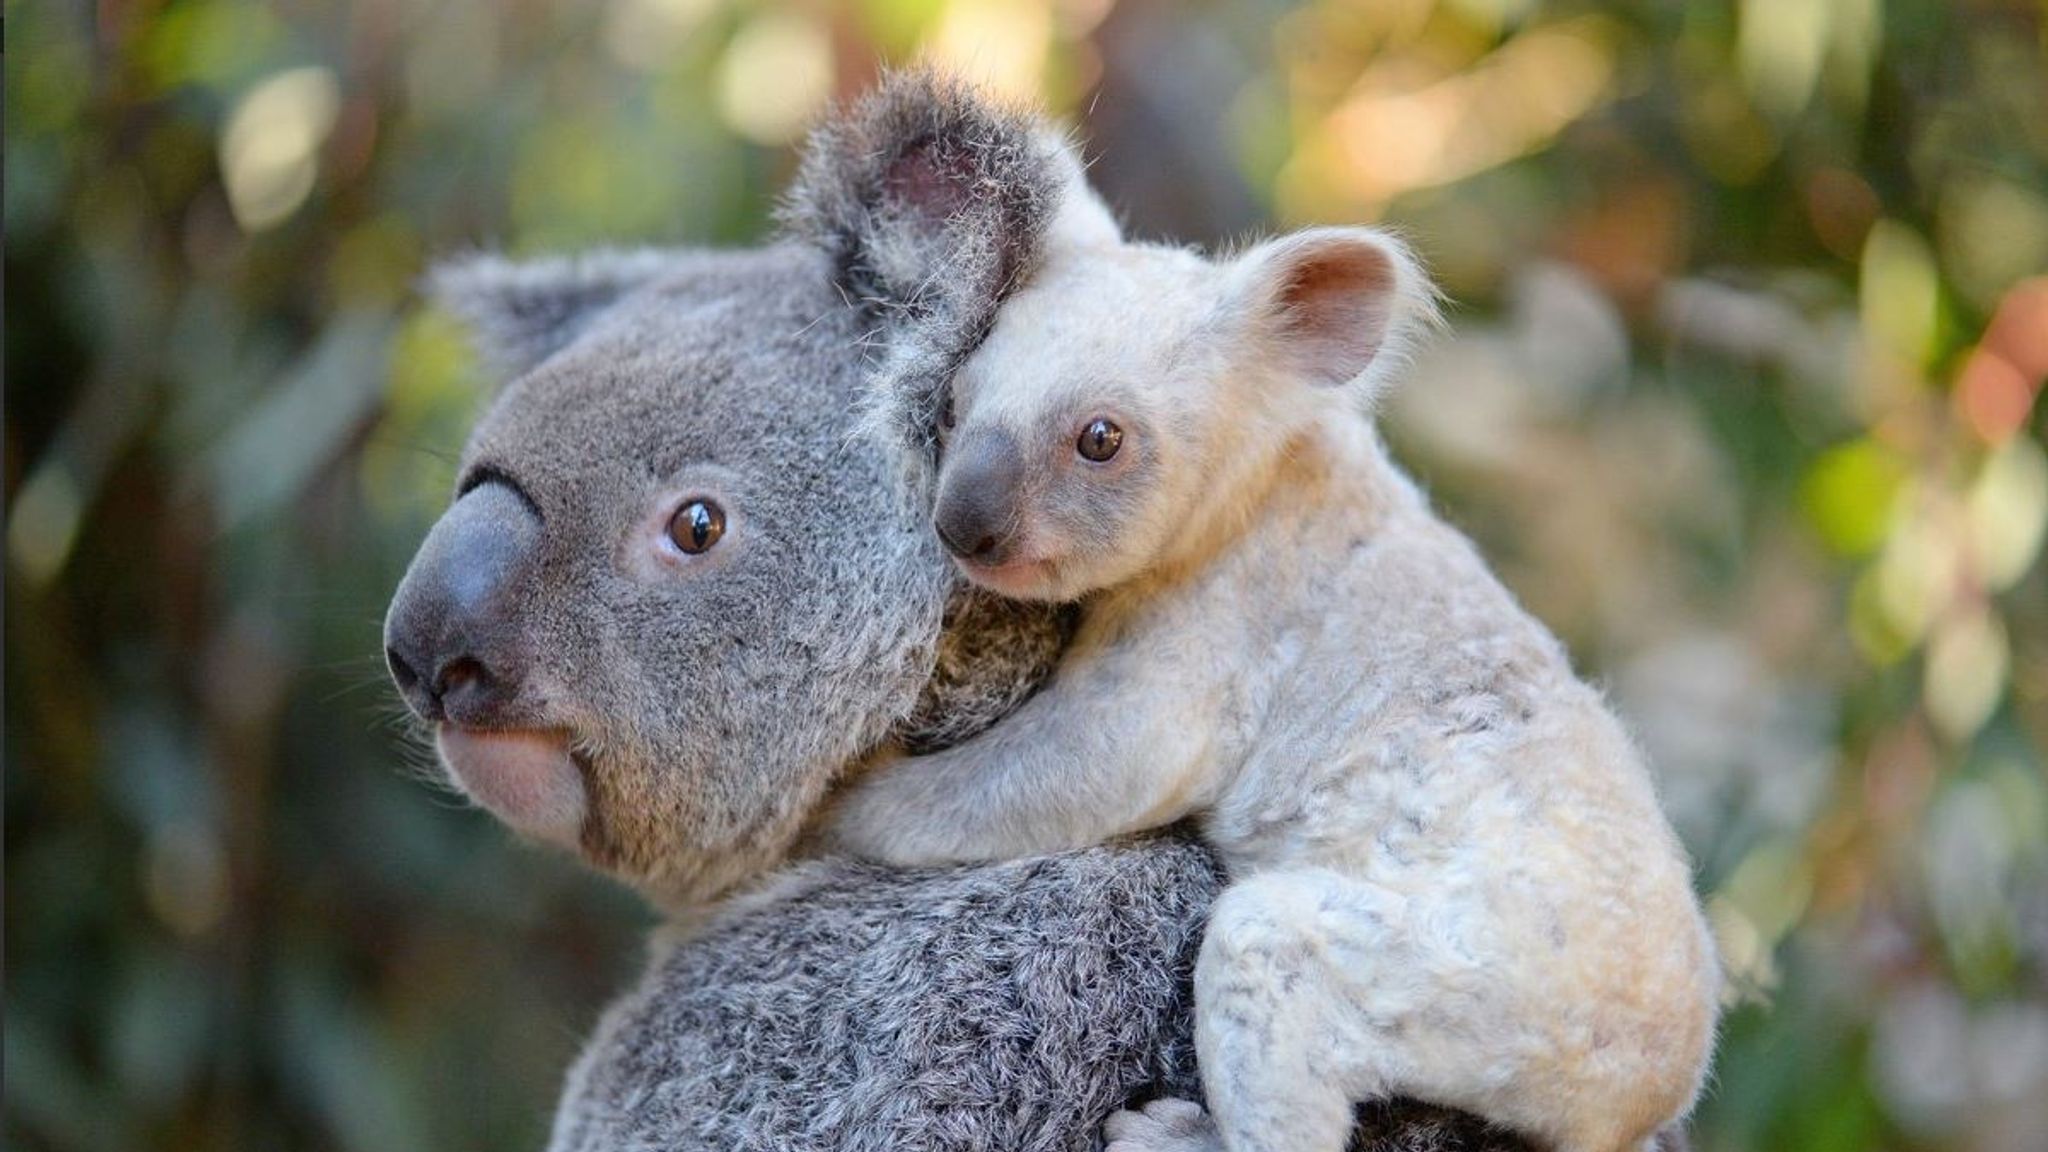 Baby koala born at Miami Zoo, named 'Hope' to show support for